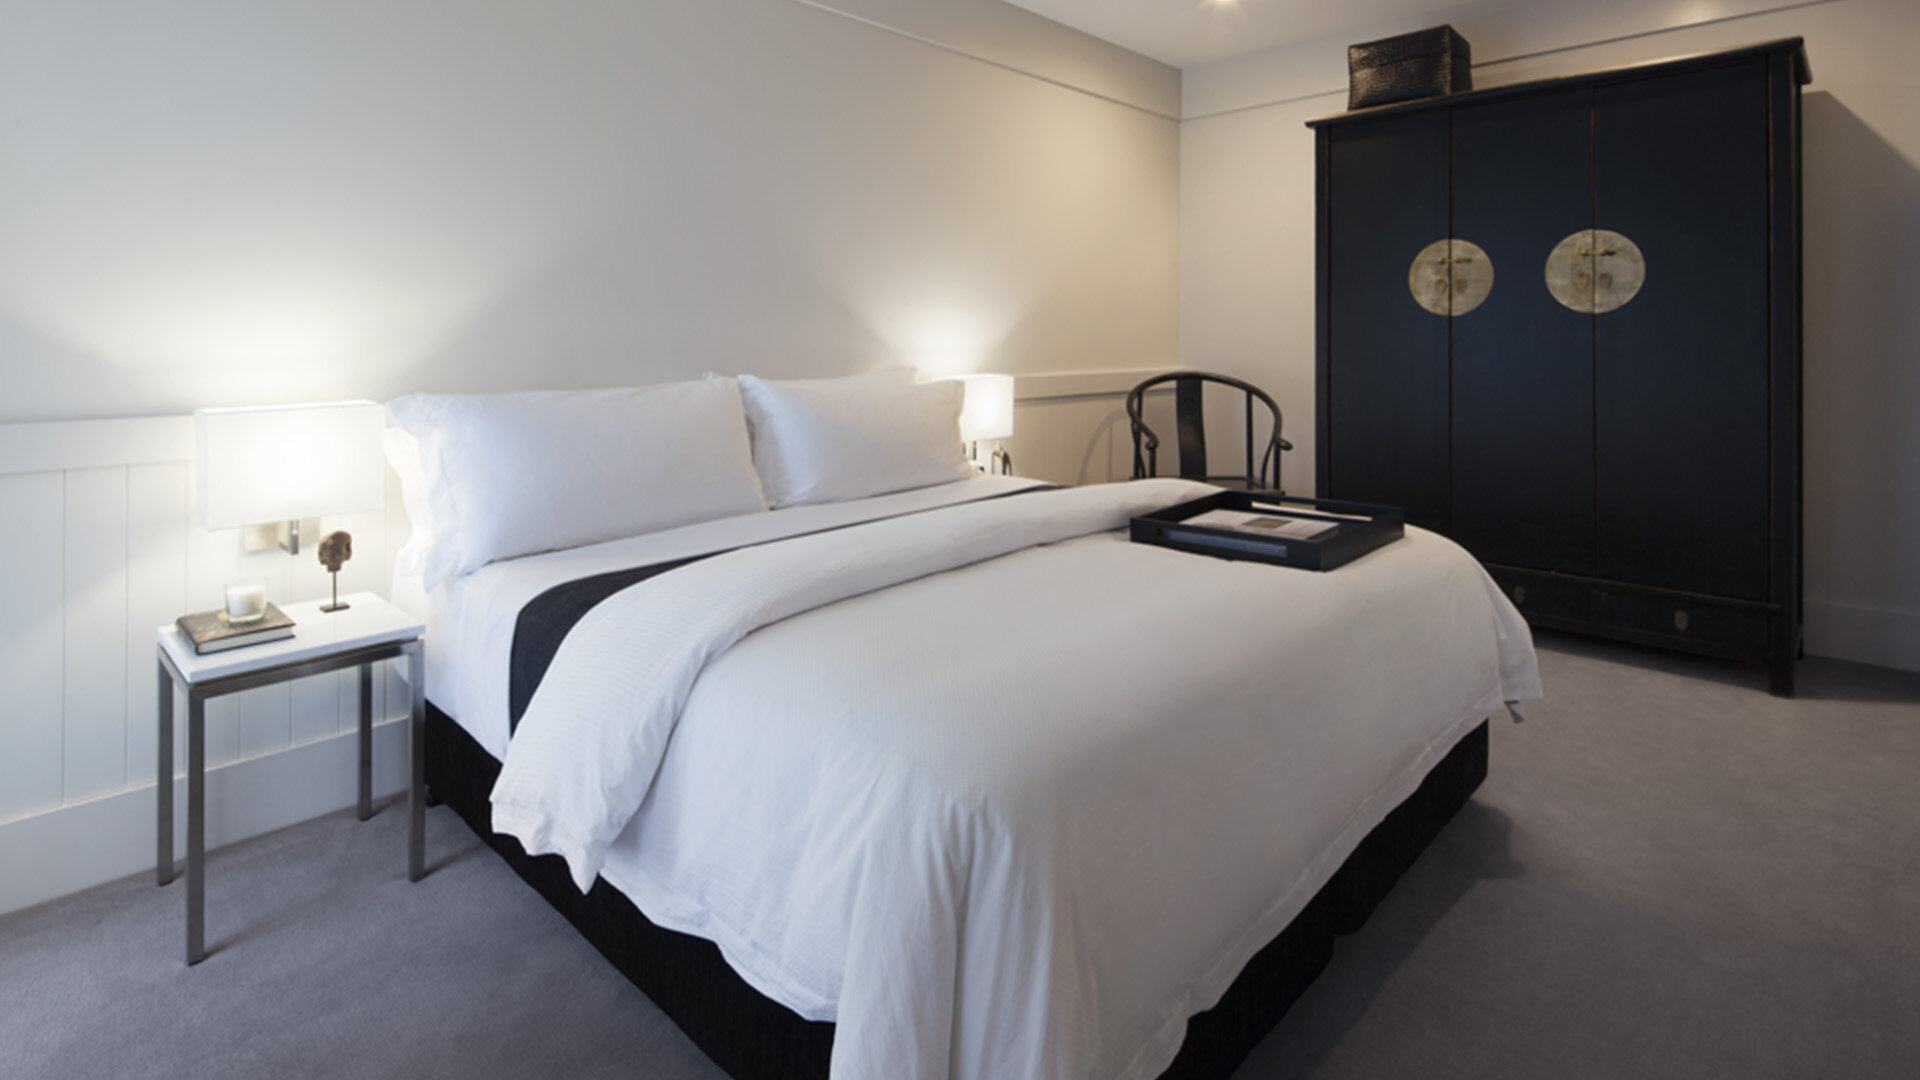 Canberra_Classy in Canberra_Luxury Apartment at Burbury Hotel © DOMA.jpg